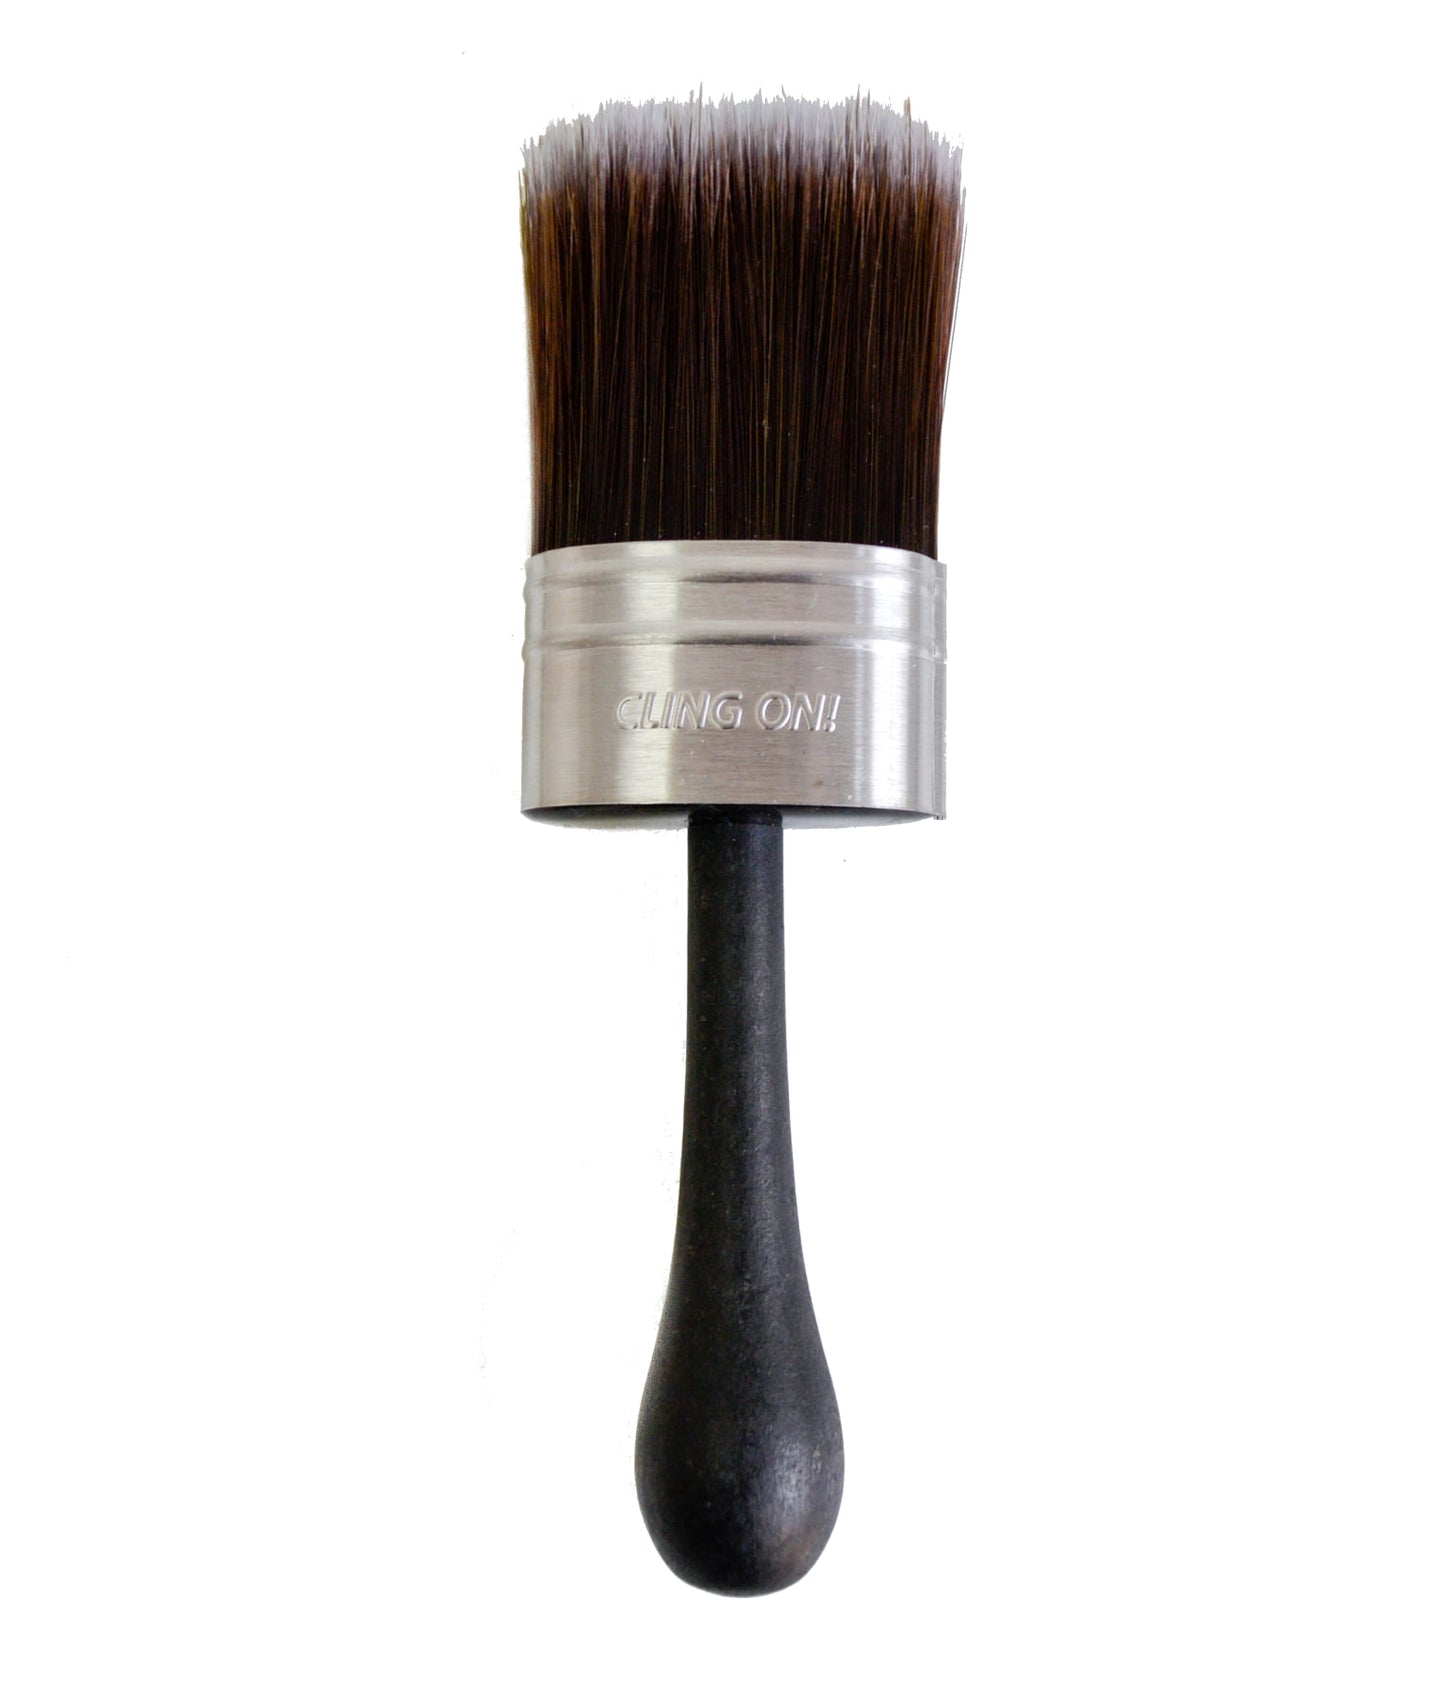 Cling On Brush SHORTY | cling-on-brushes-shorty | Cling On!